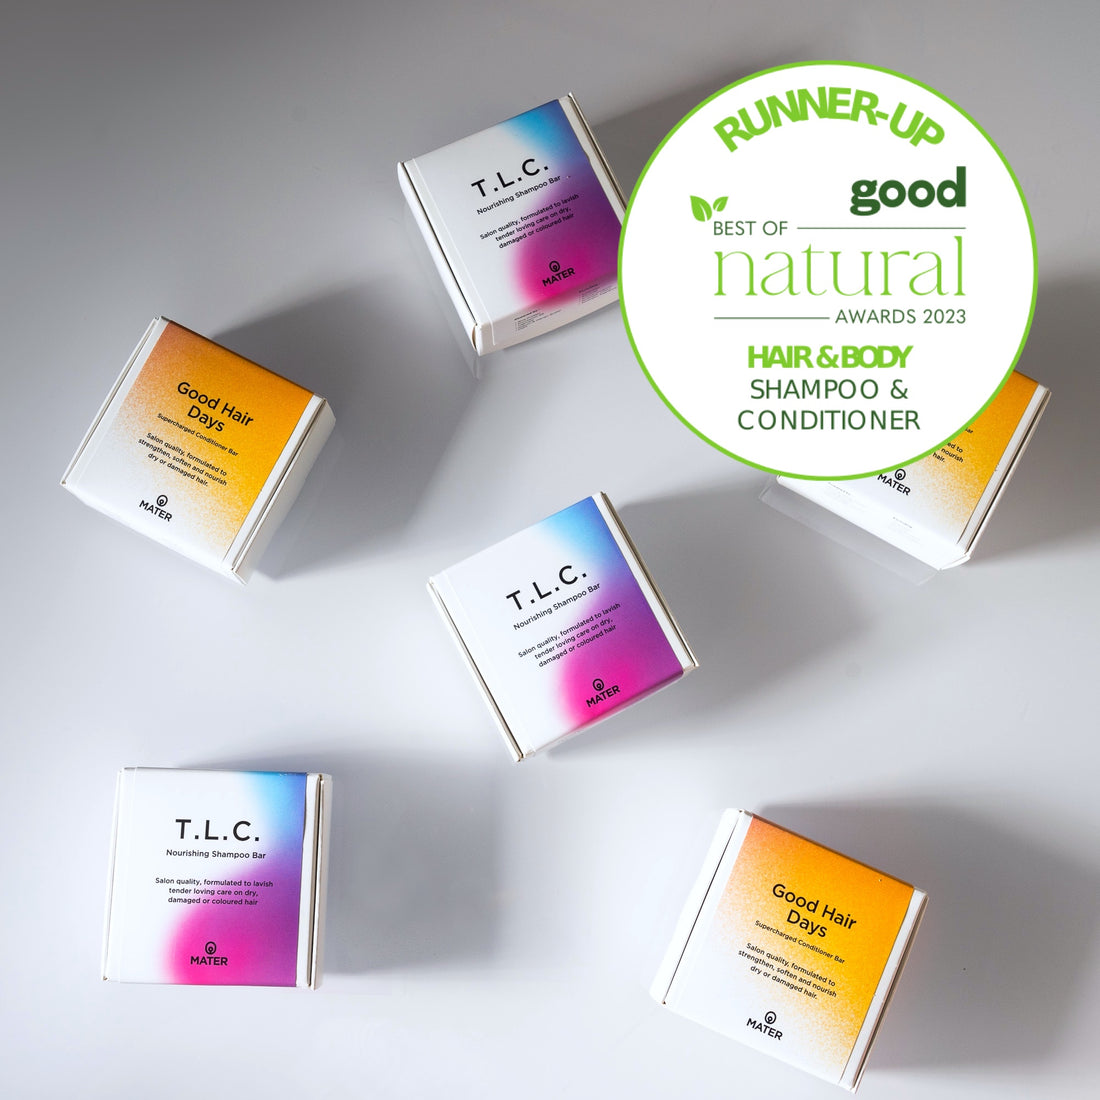 / HAIR Ritual Clinches Runner-Up at Good Magazine's Best of Natural Awards 2023!